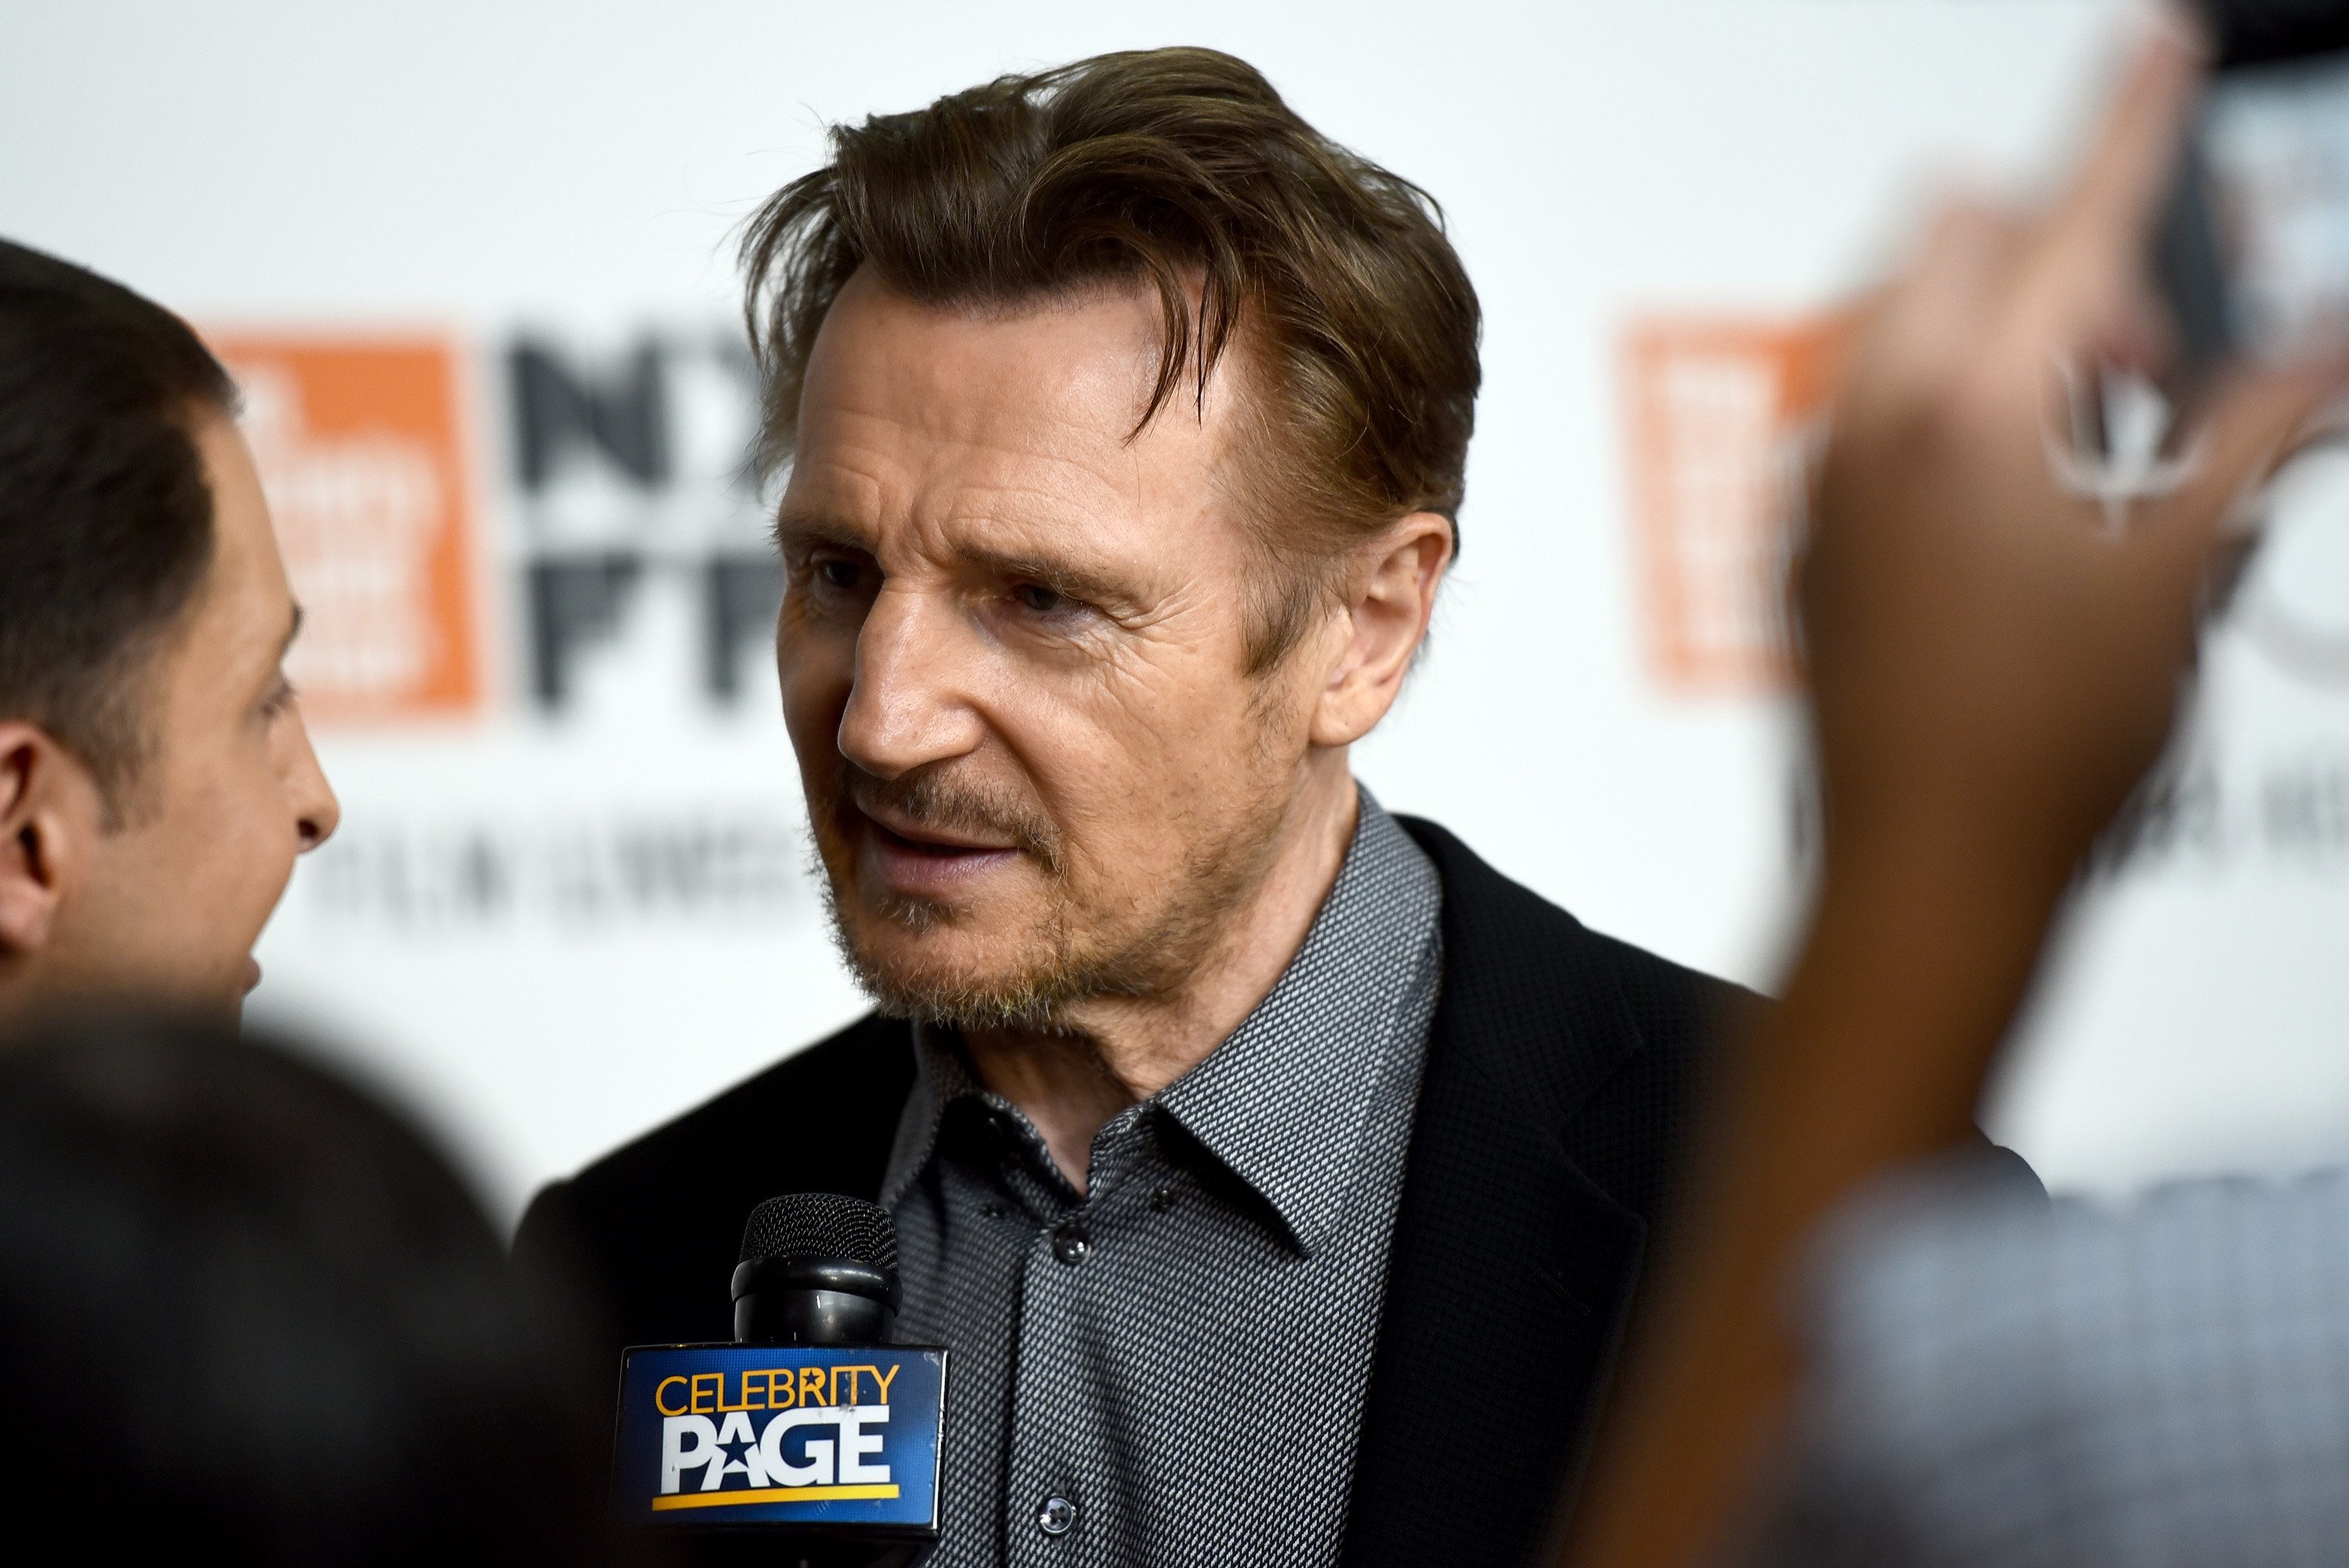 Liam Neeson attends the Netflix's "The Ballad of Buster Scruggs" NYFF Red Carpet Premiere in 2018. | Source: Getty Images